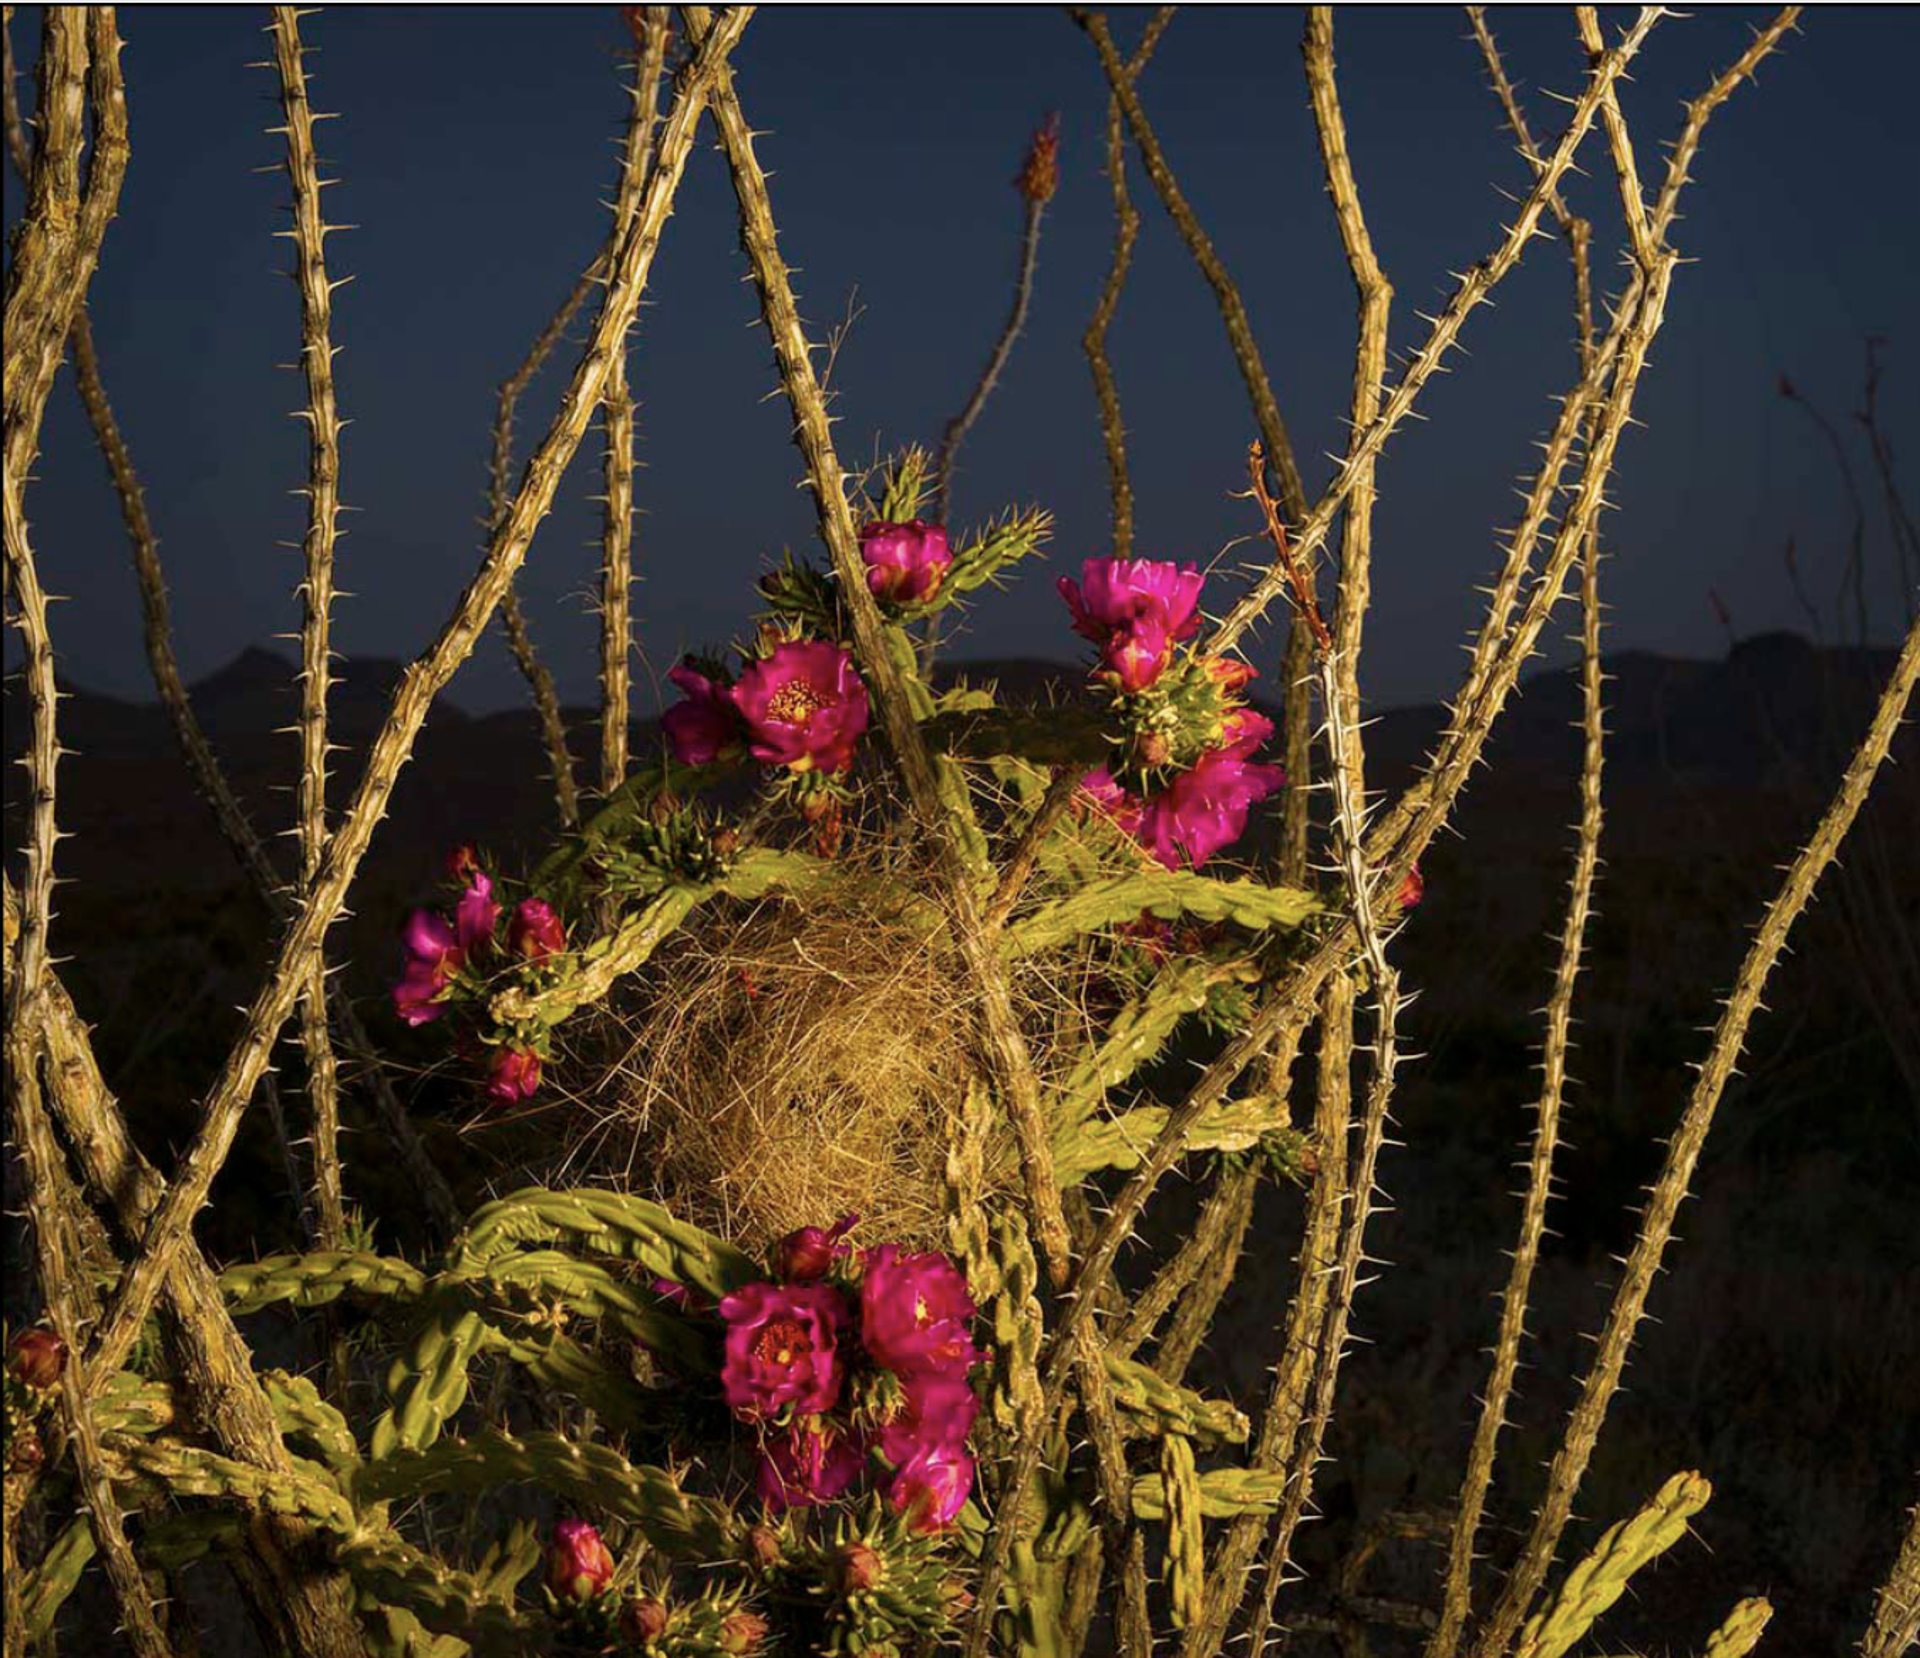 Cactus Wren Nest and Cholla - Bloom by James H. Evans